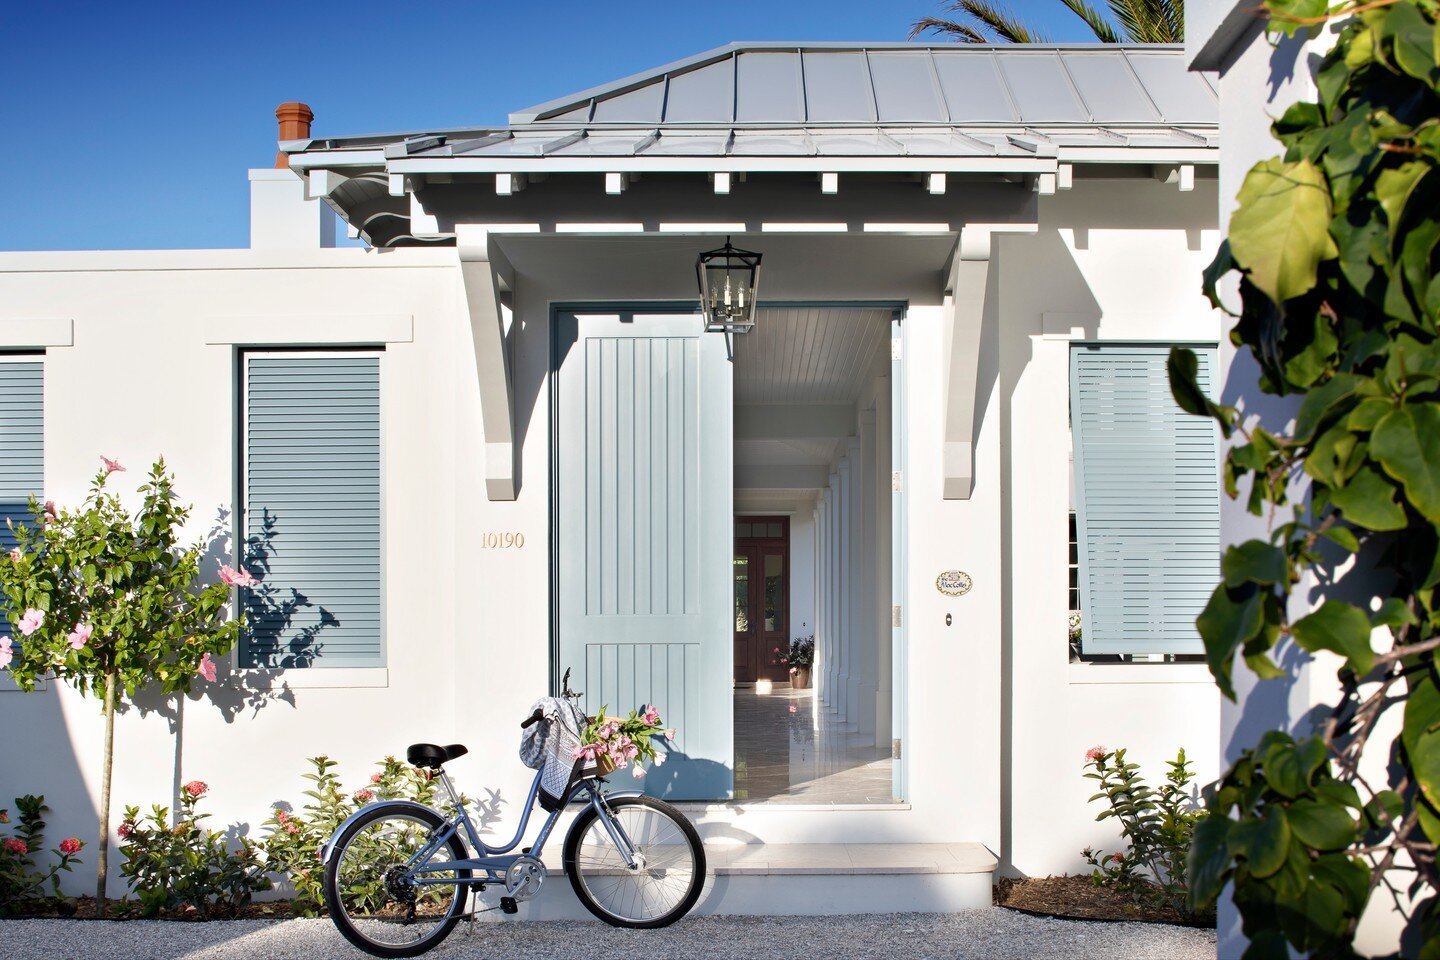 Did someone say it's #nationalbiketoworkday? Count me in! 🚲
📸: @jessglynnphoto

--

More #CoastalModern at www.LeahMuller.com